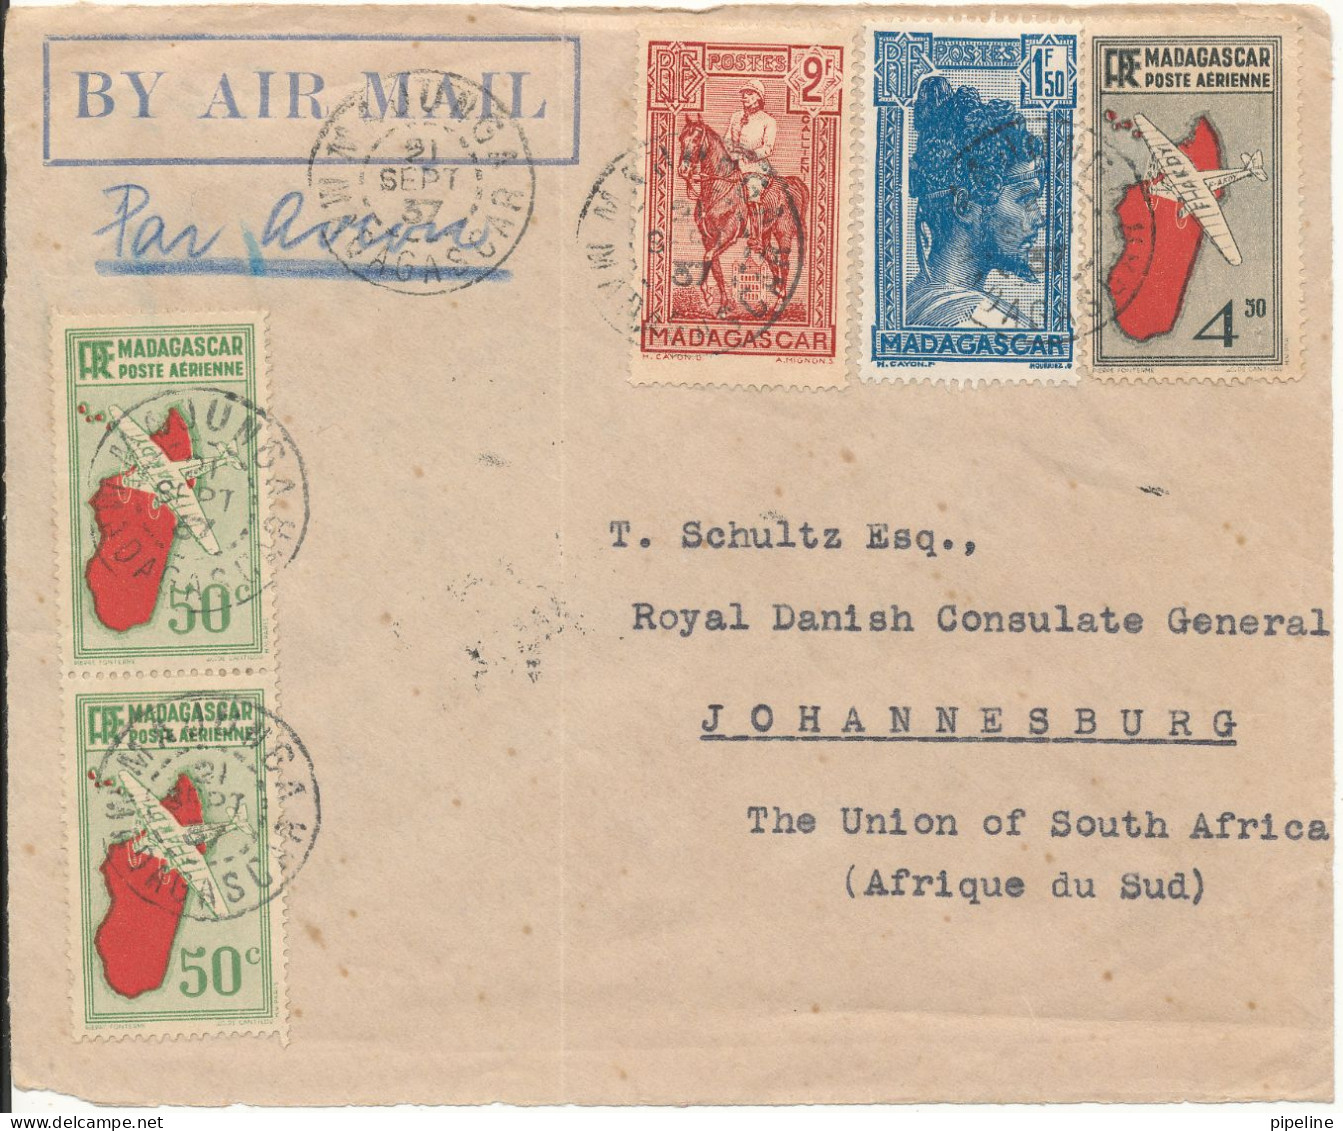 Madagascar FRONTPAGE Of A Cover Sent To The Royal Danish Consulate Johannesburg South Africa 21-9-1937 NB: NB : - Luftpost